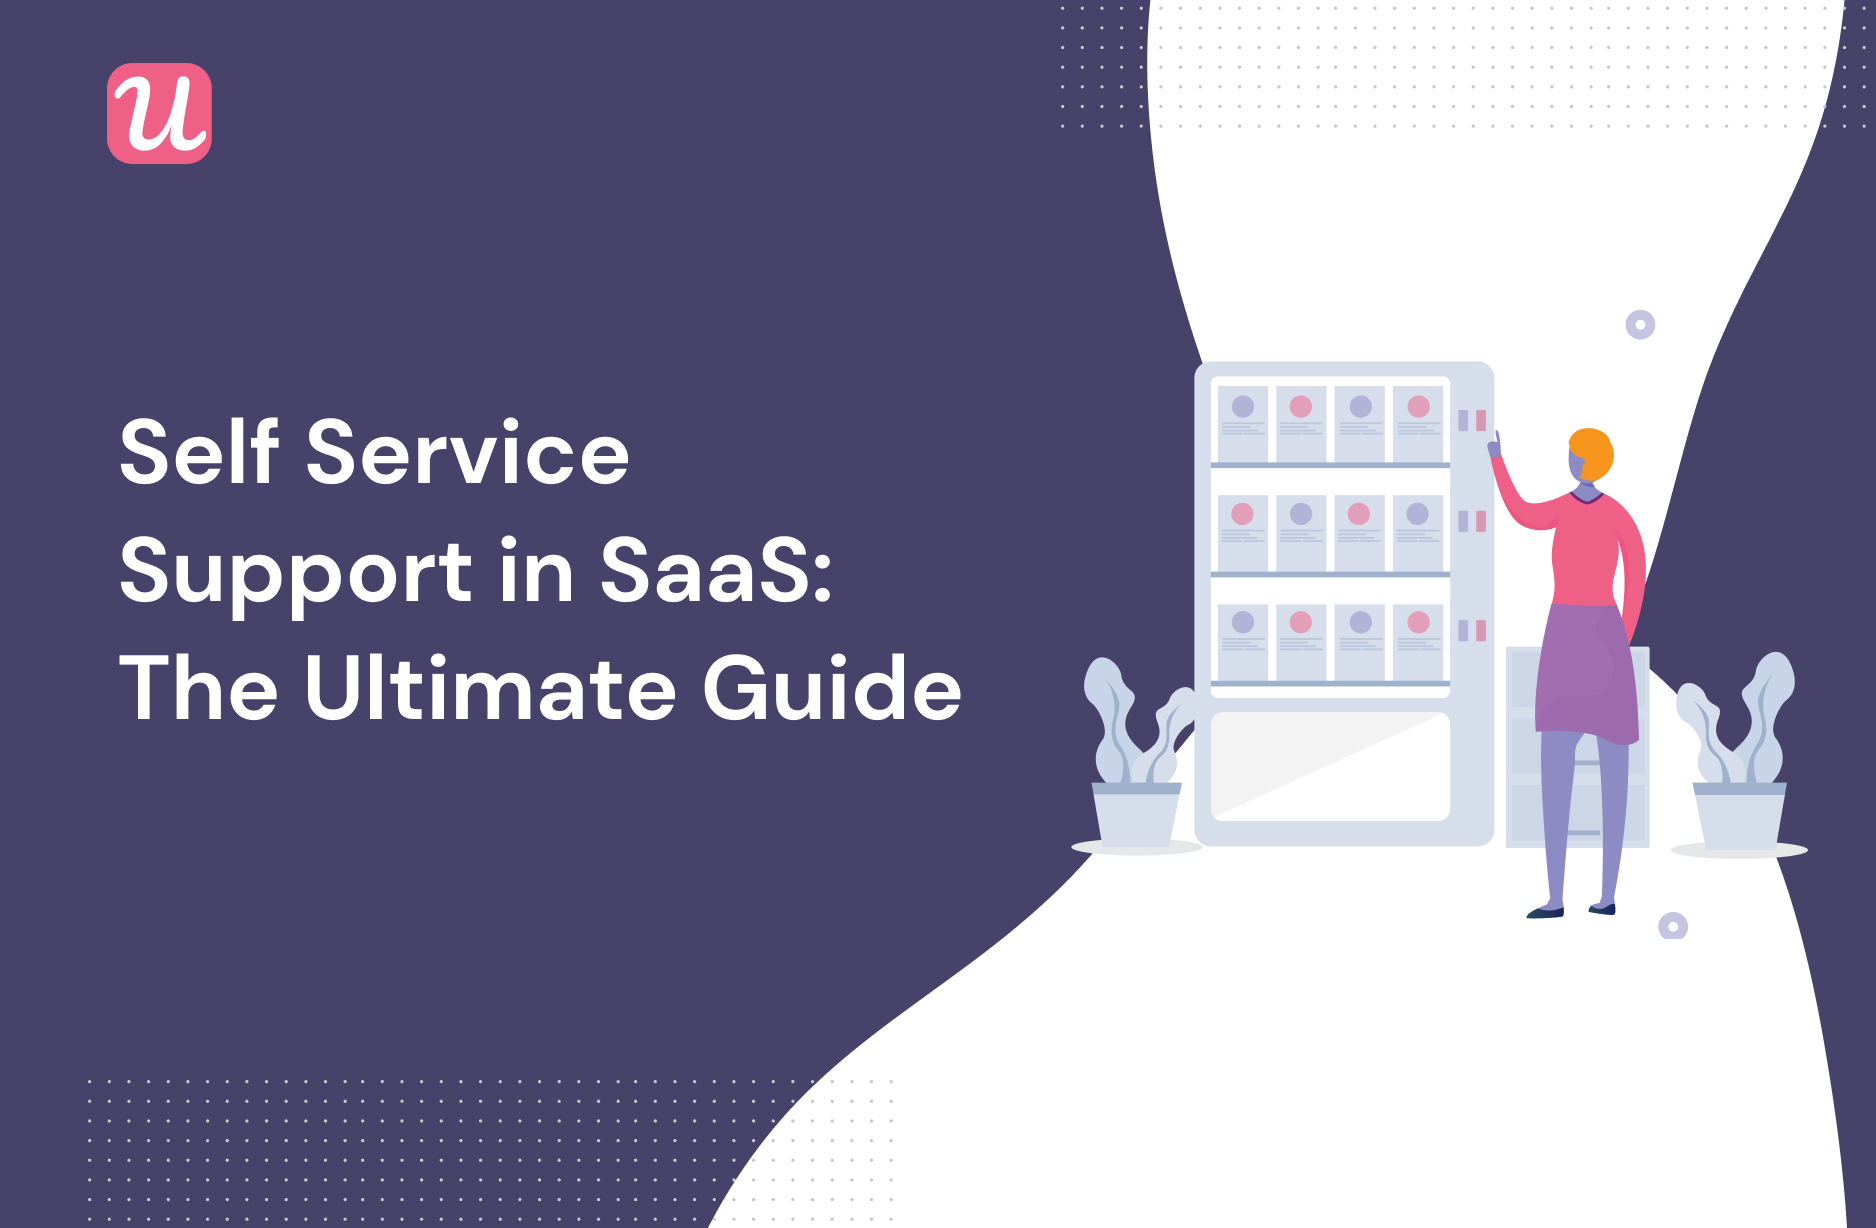 Self Service Support In SaaS: The Ultimate Guide